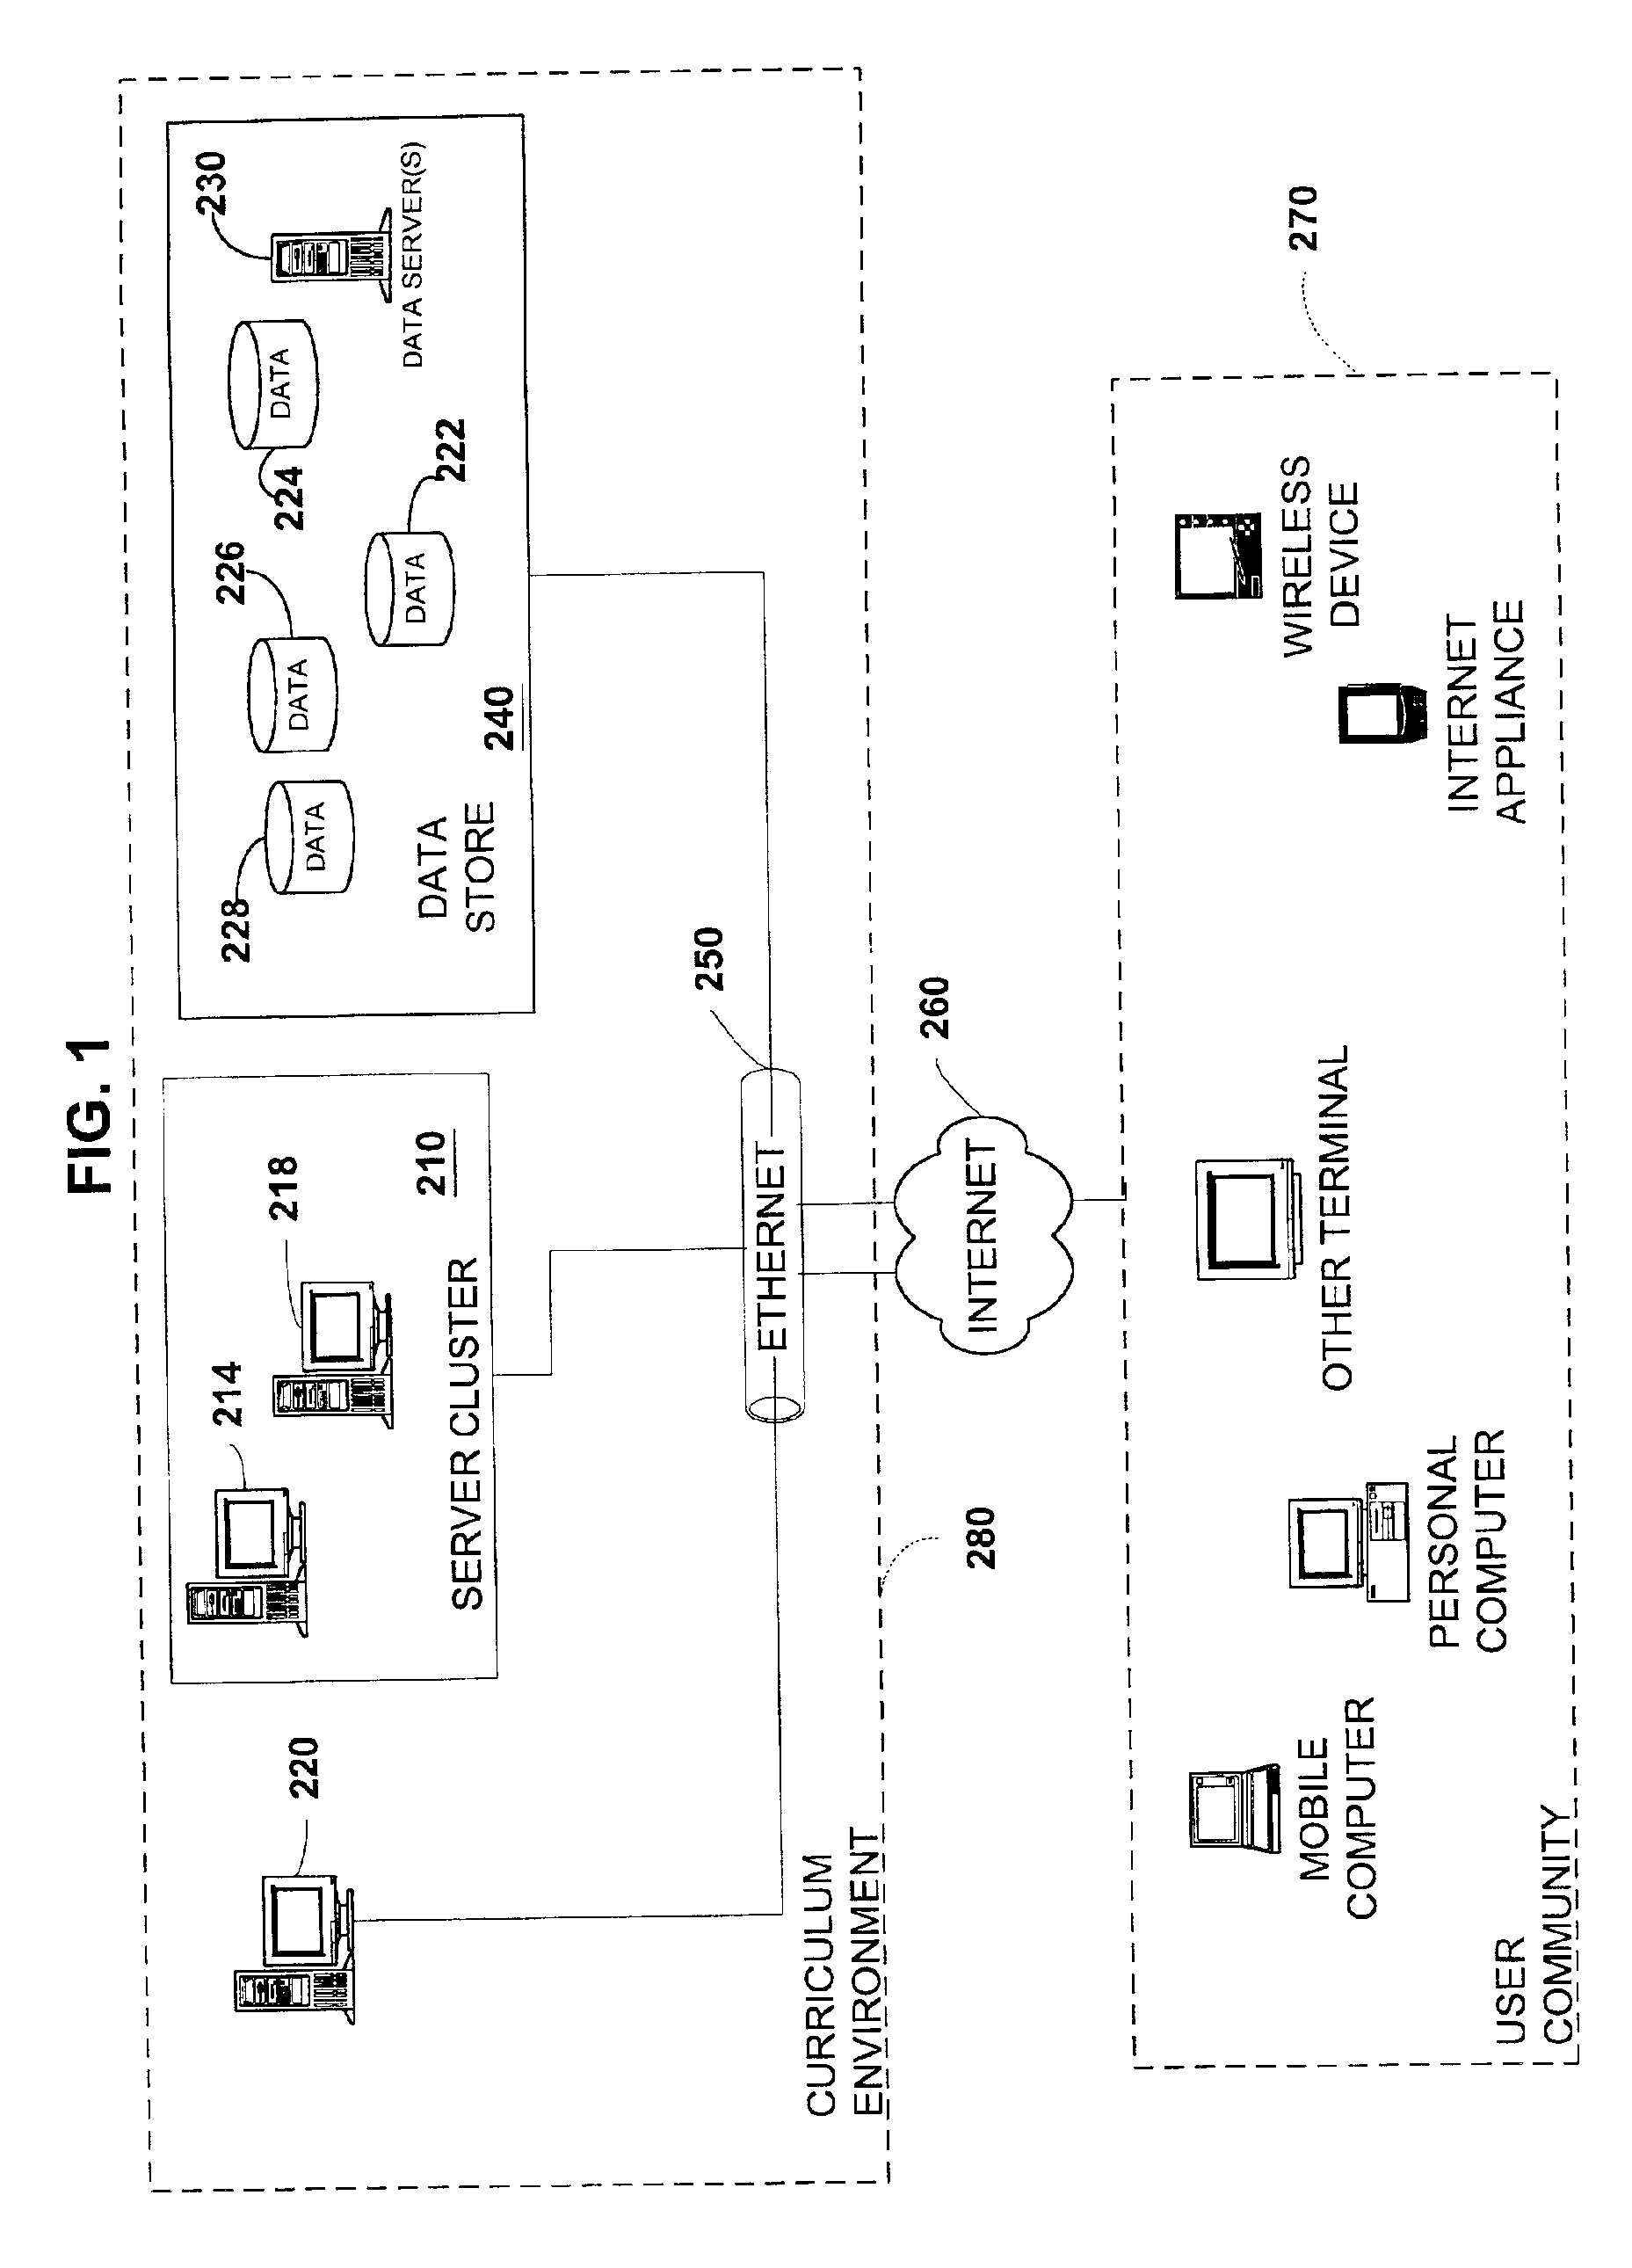 Adaptive content delivery system and method